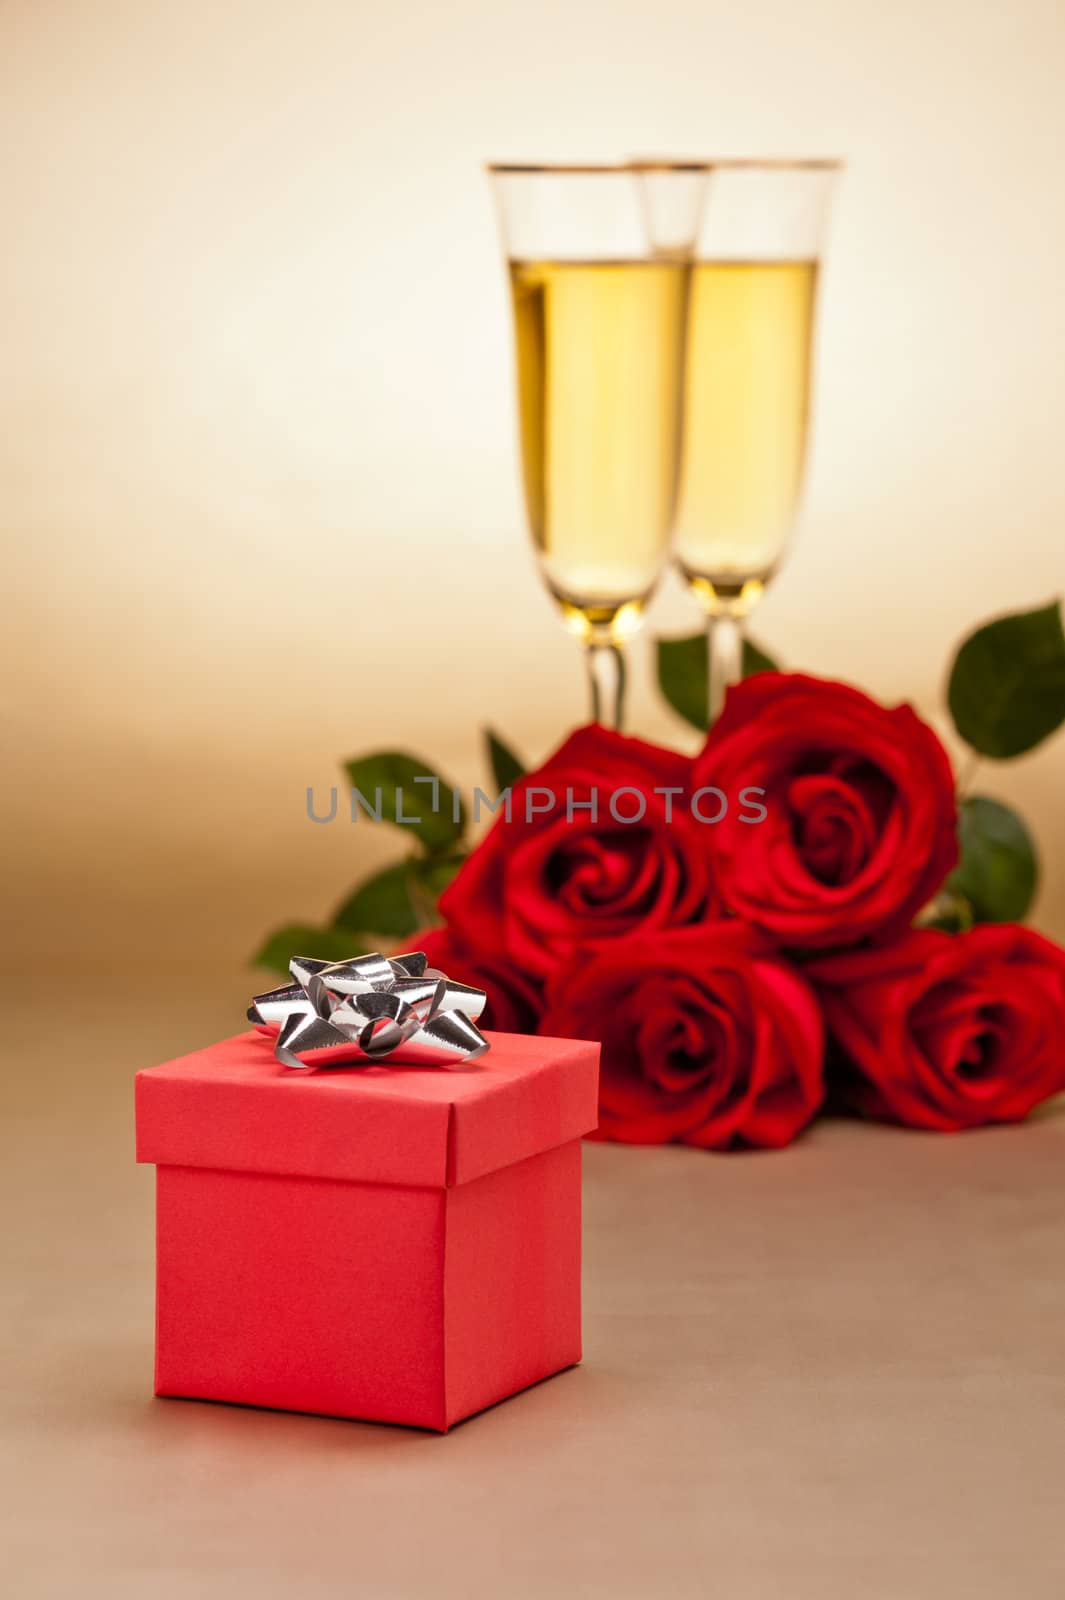 Champagne glasses, present and roses by 3523Studio